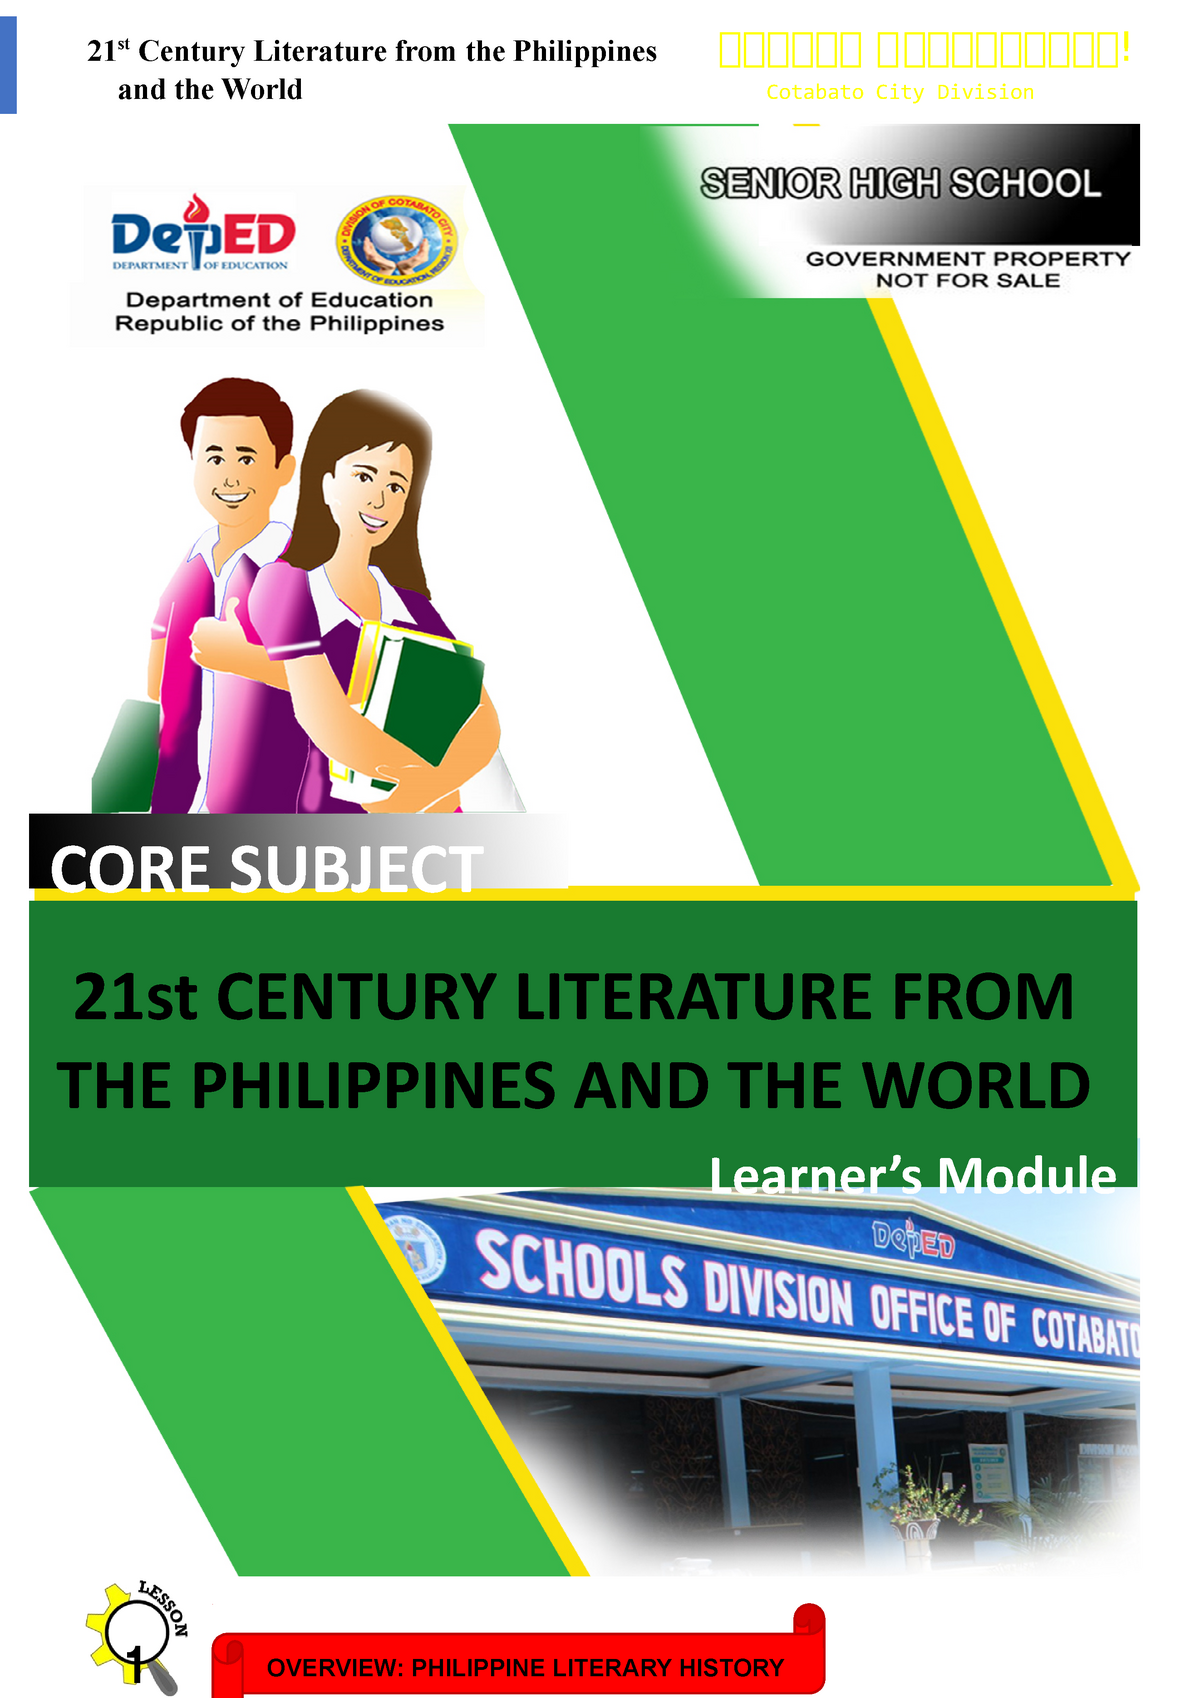 what is 21st literature of the philippines and the world